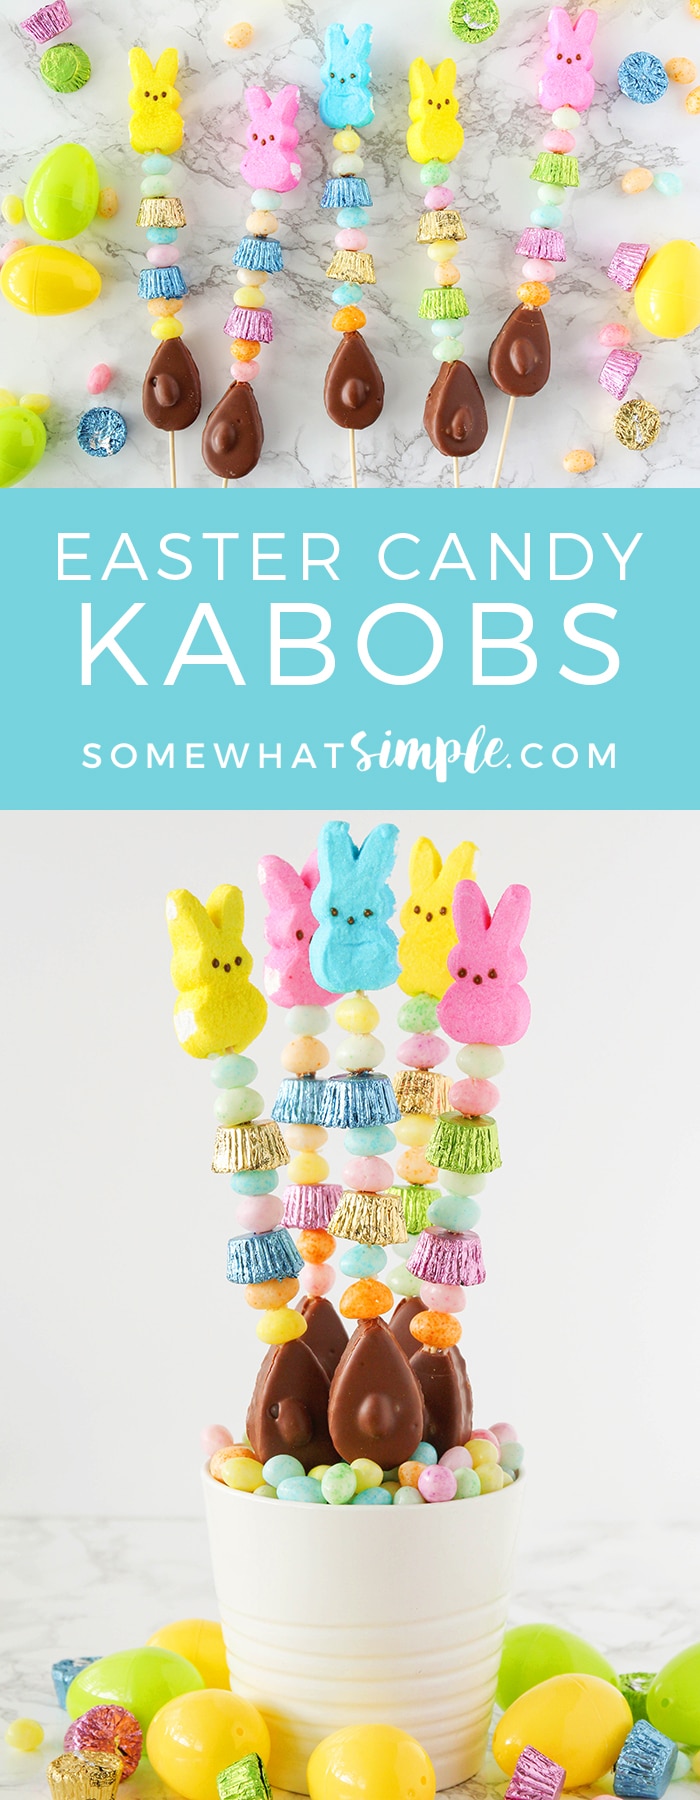 Easy Easter Treats - Easter Candy Kabobs - Somewhat Simple